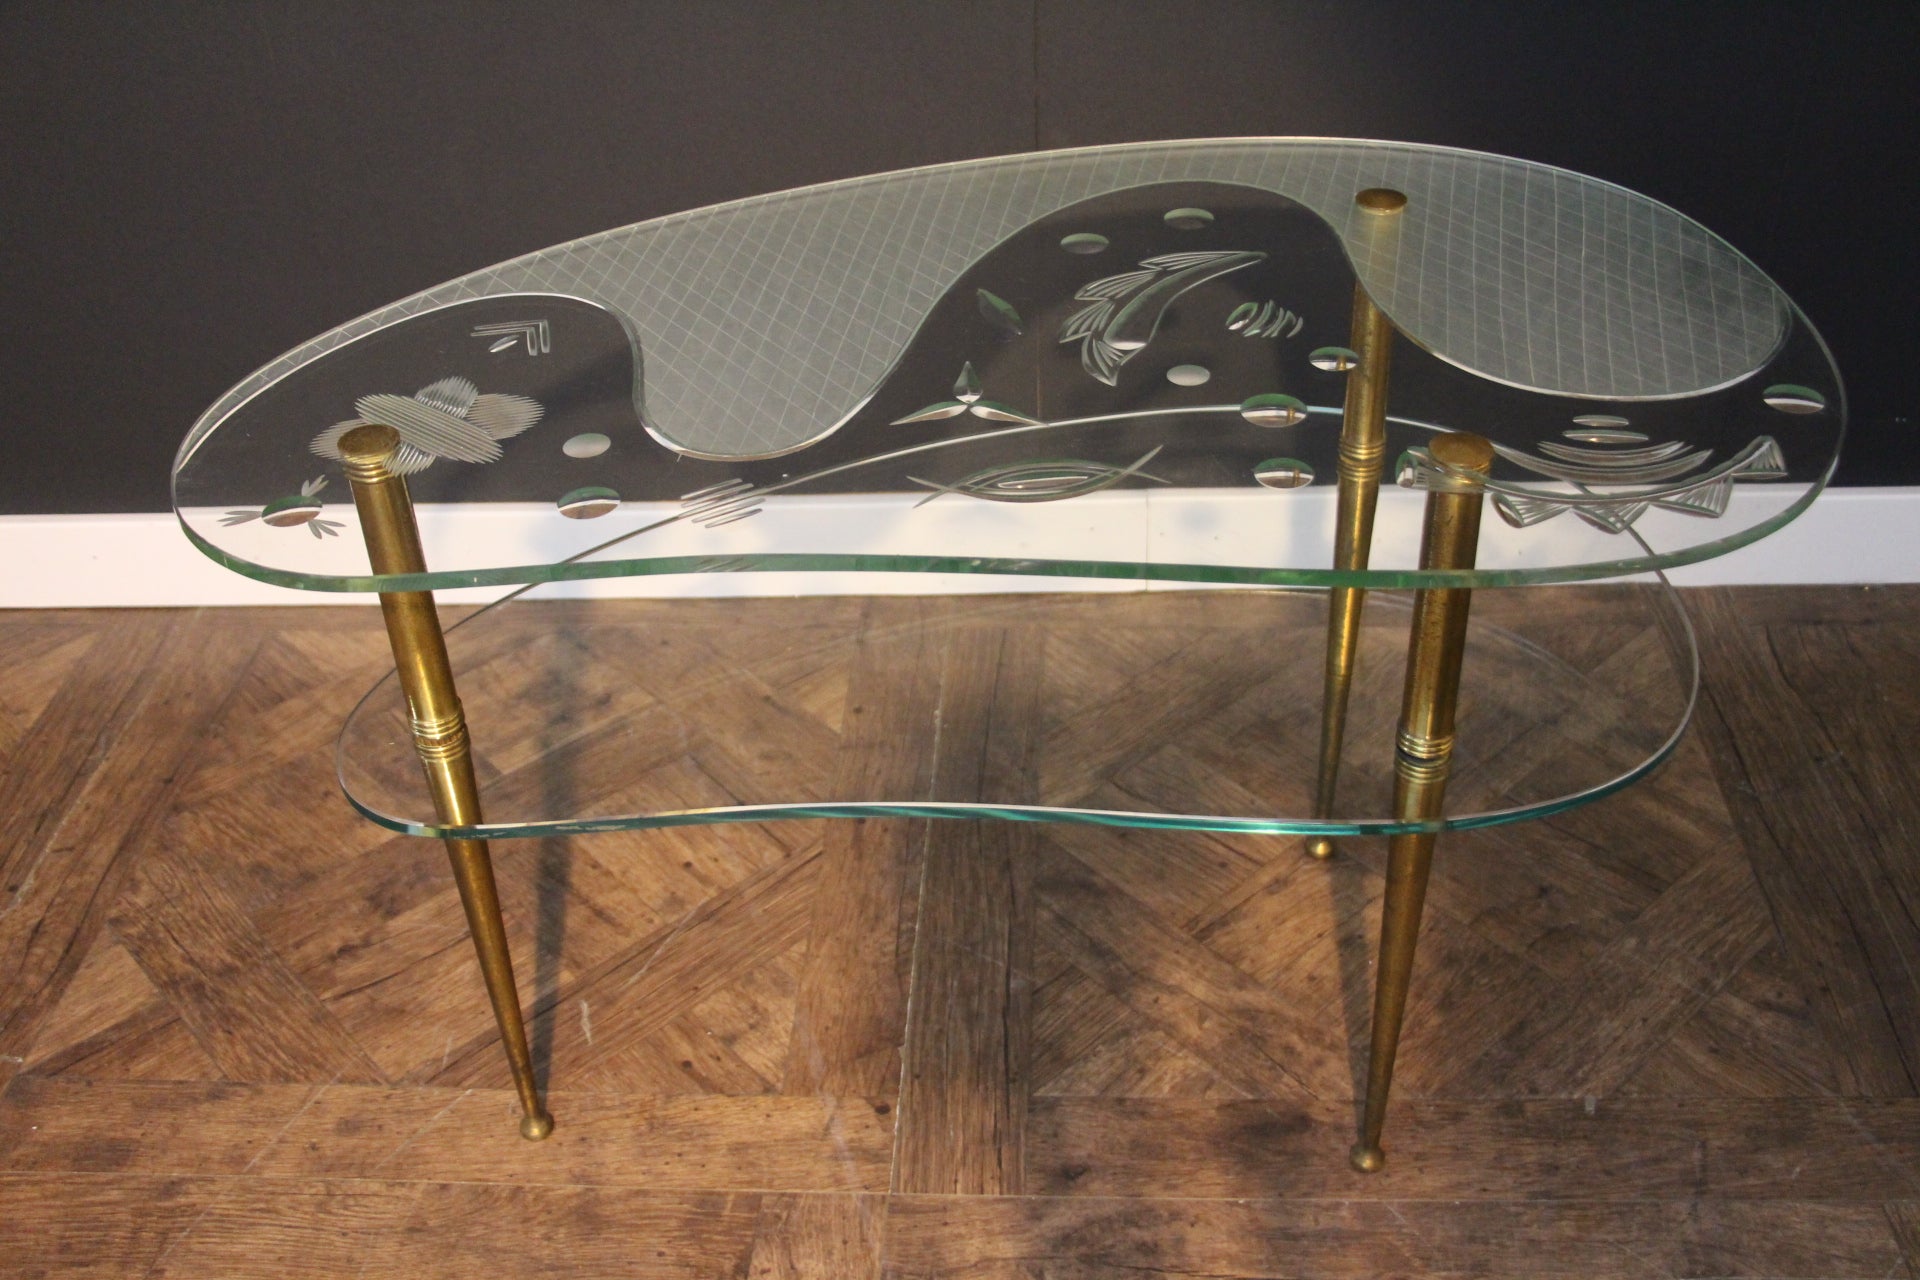 This very nice mid century glass top side table or coffee table features a free style shape and rests on 3 brass legs. It has got 2 glass tiers to provide extra storage.
Its glass top is a real work of art. Indeed, it features all hand engraved